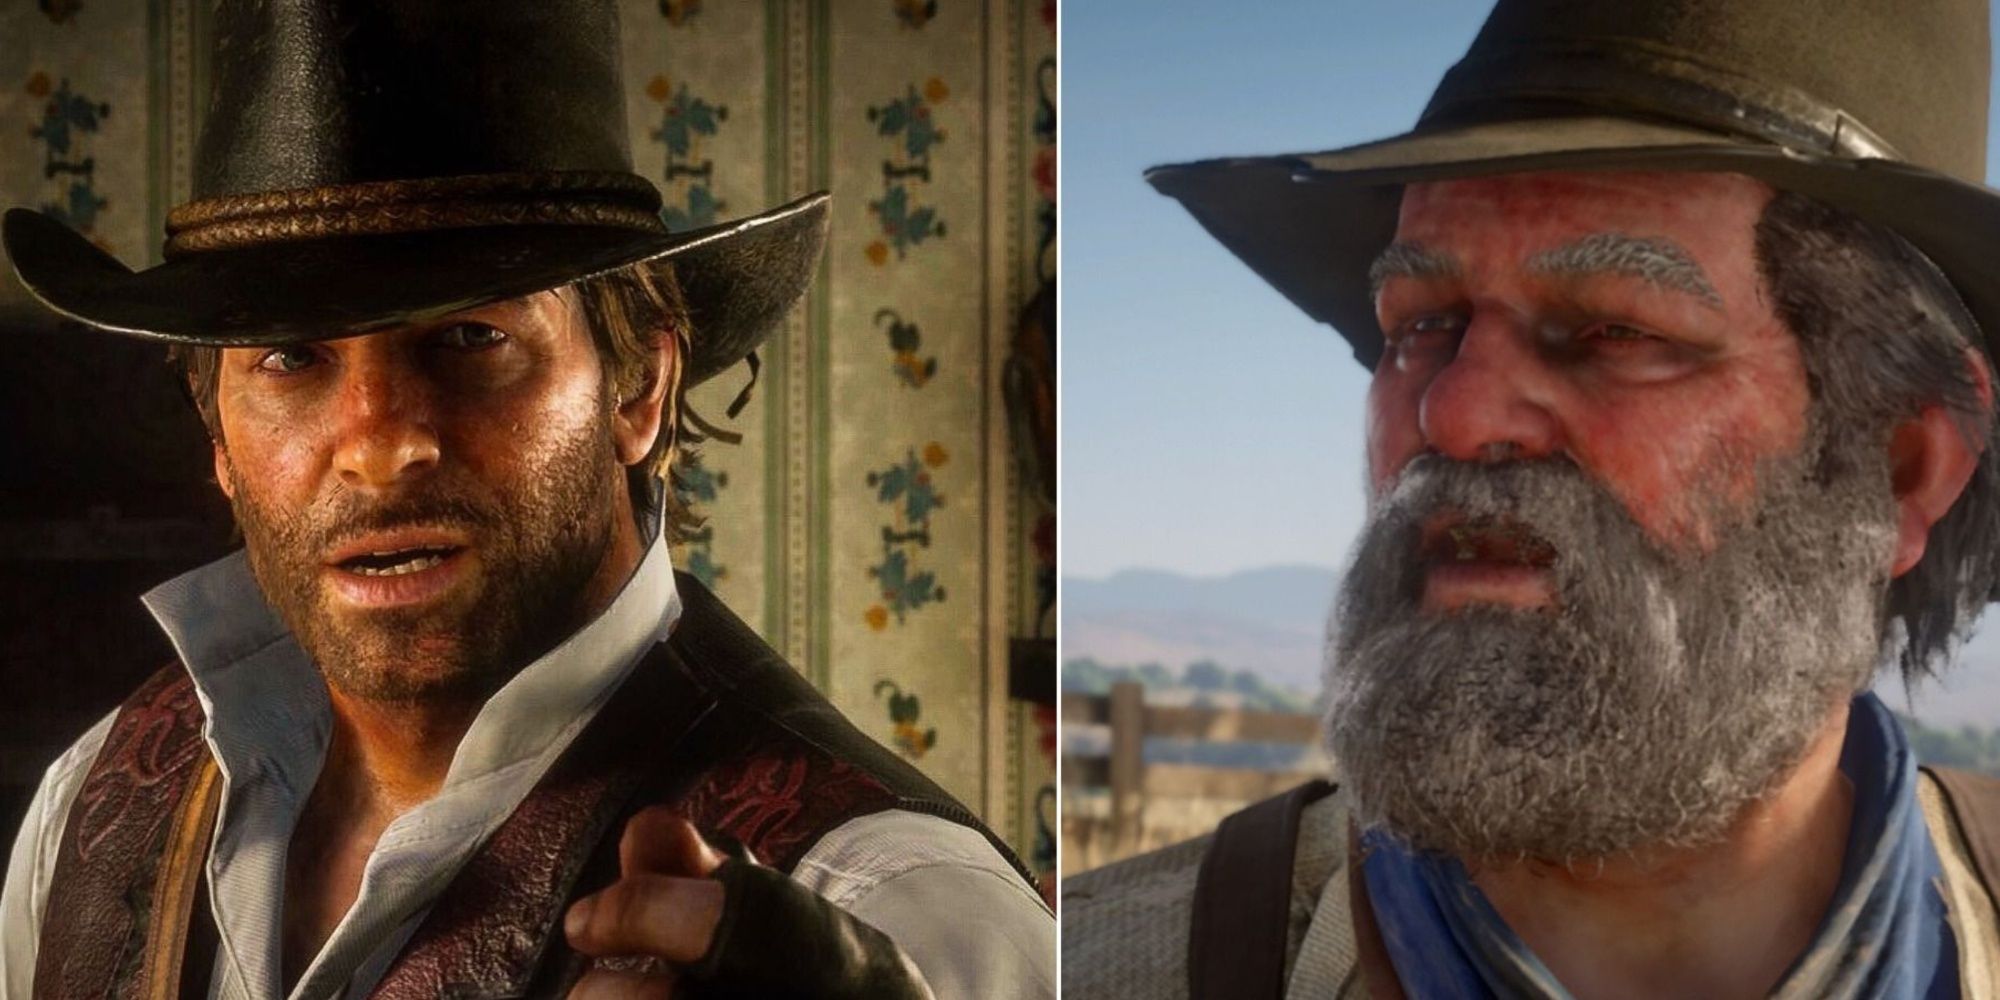 Arthur with a brown vest and black hat side-by-side with Uncle in a brown suede hat and an unsure expression on his face.